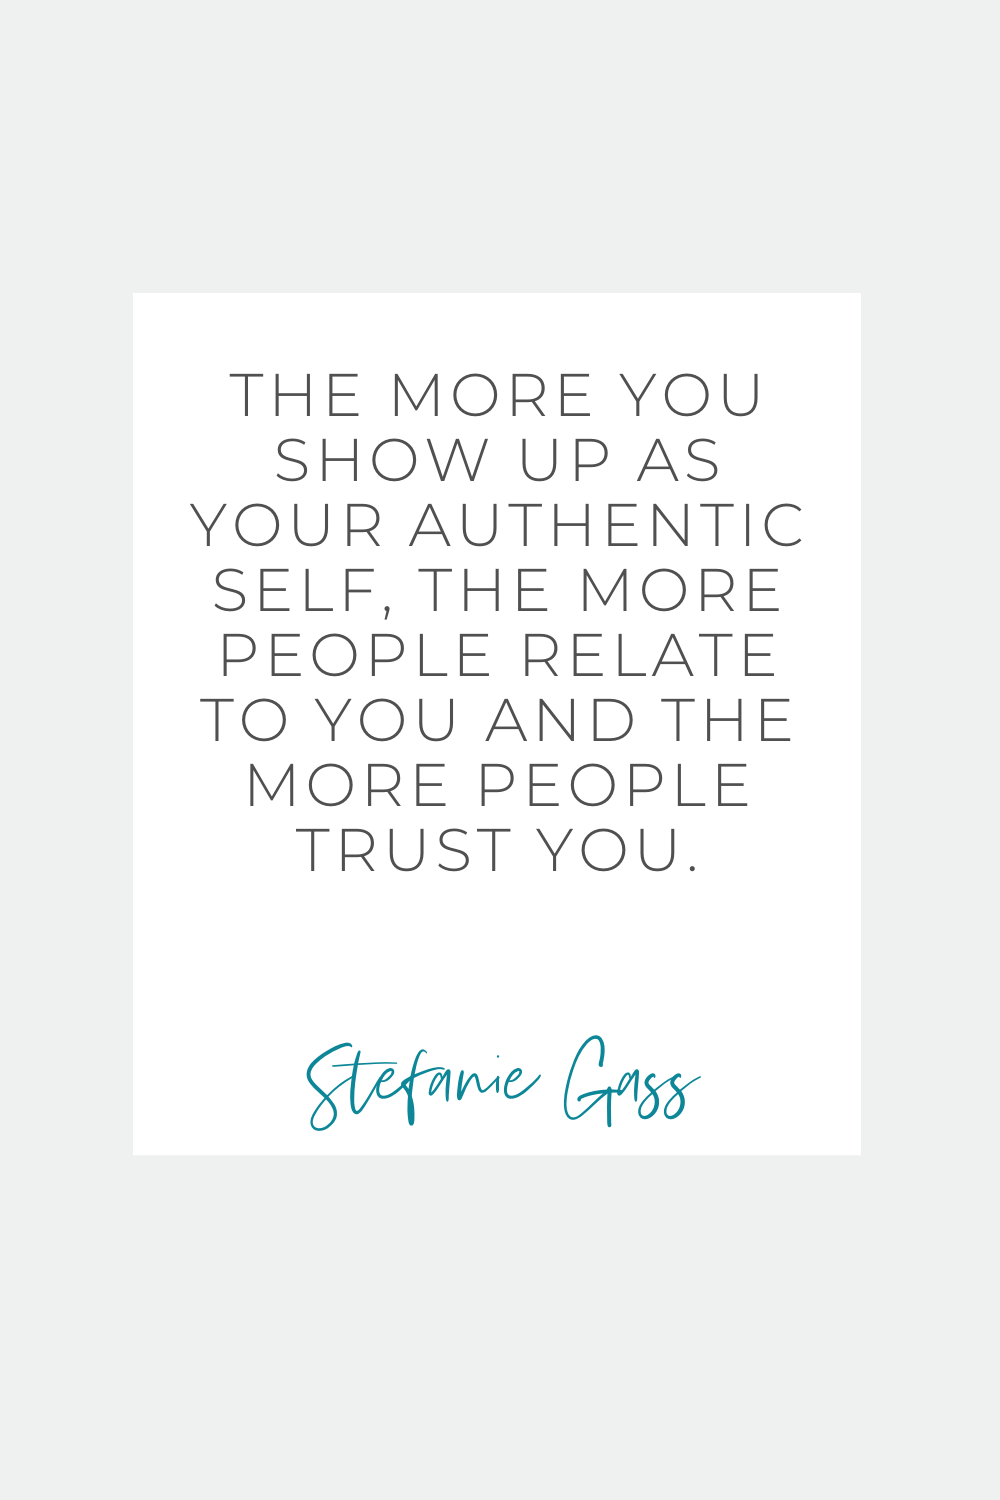 Stefanie Gass Quote: the more you show up as your authentic self, the more people relate to you and the more people trust you.